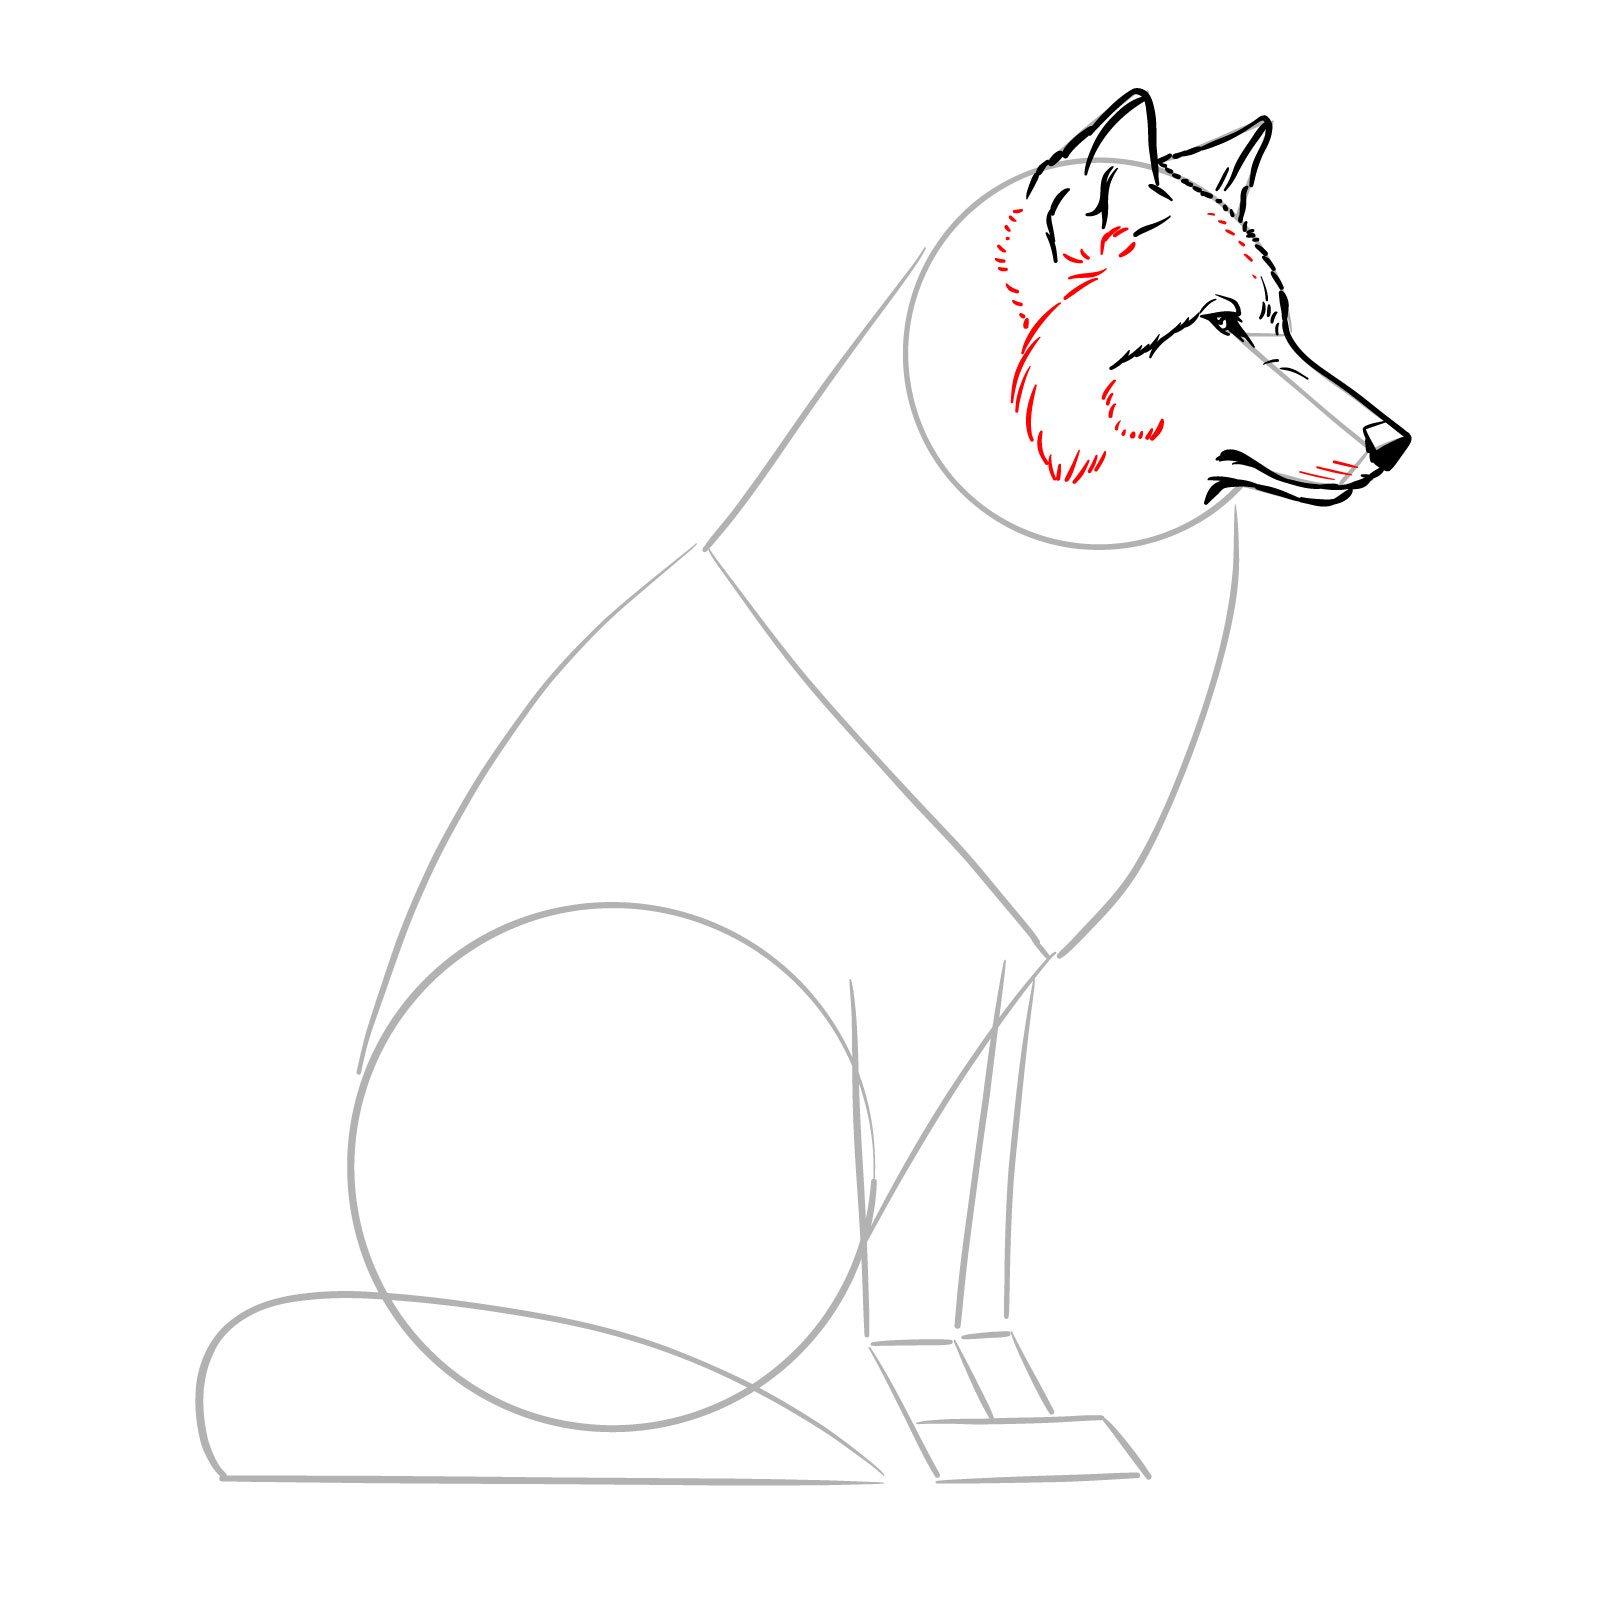 Finalizing the head details with whisker marks in a sitting wolf drawing - step 08